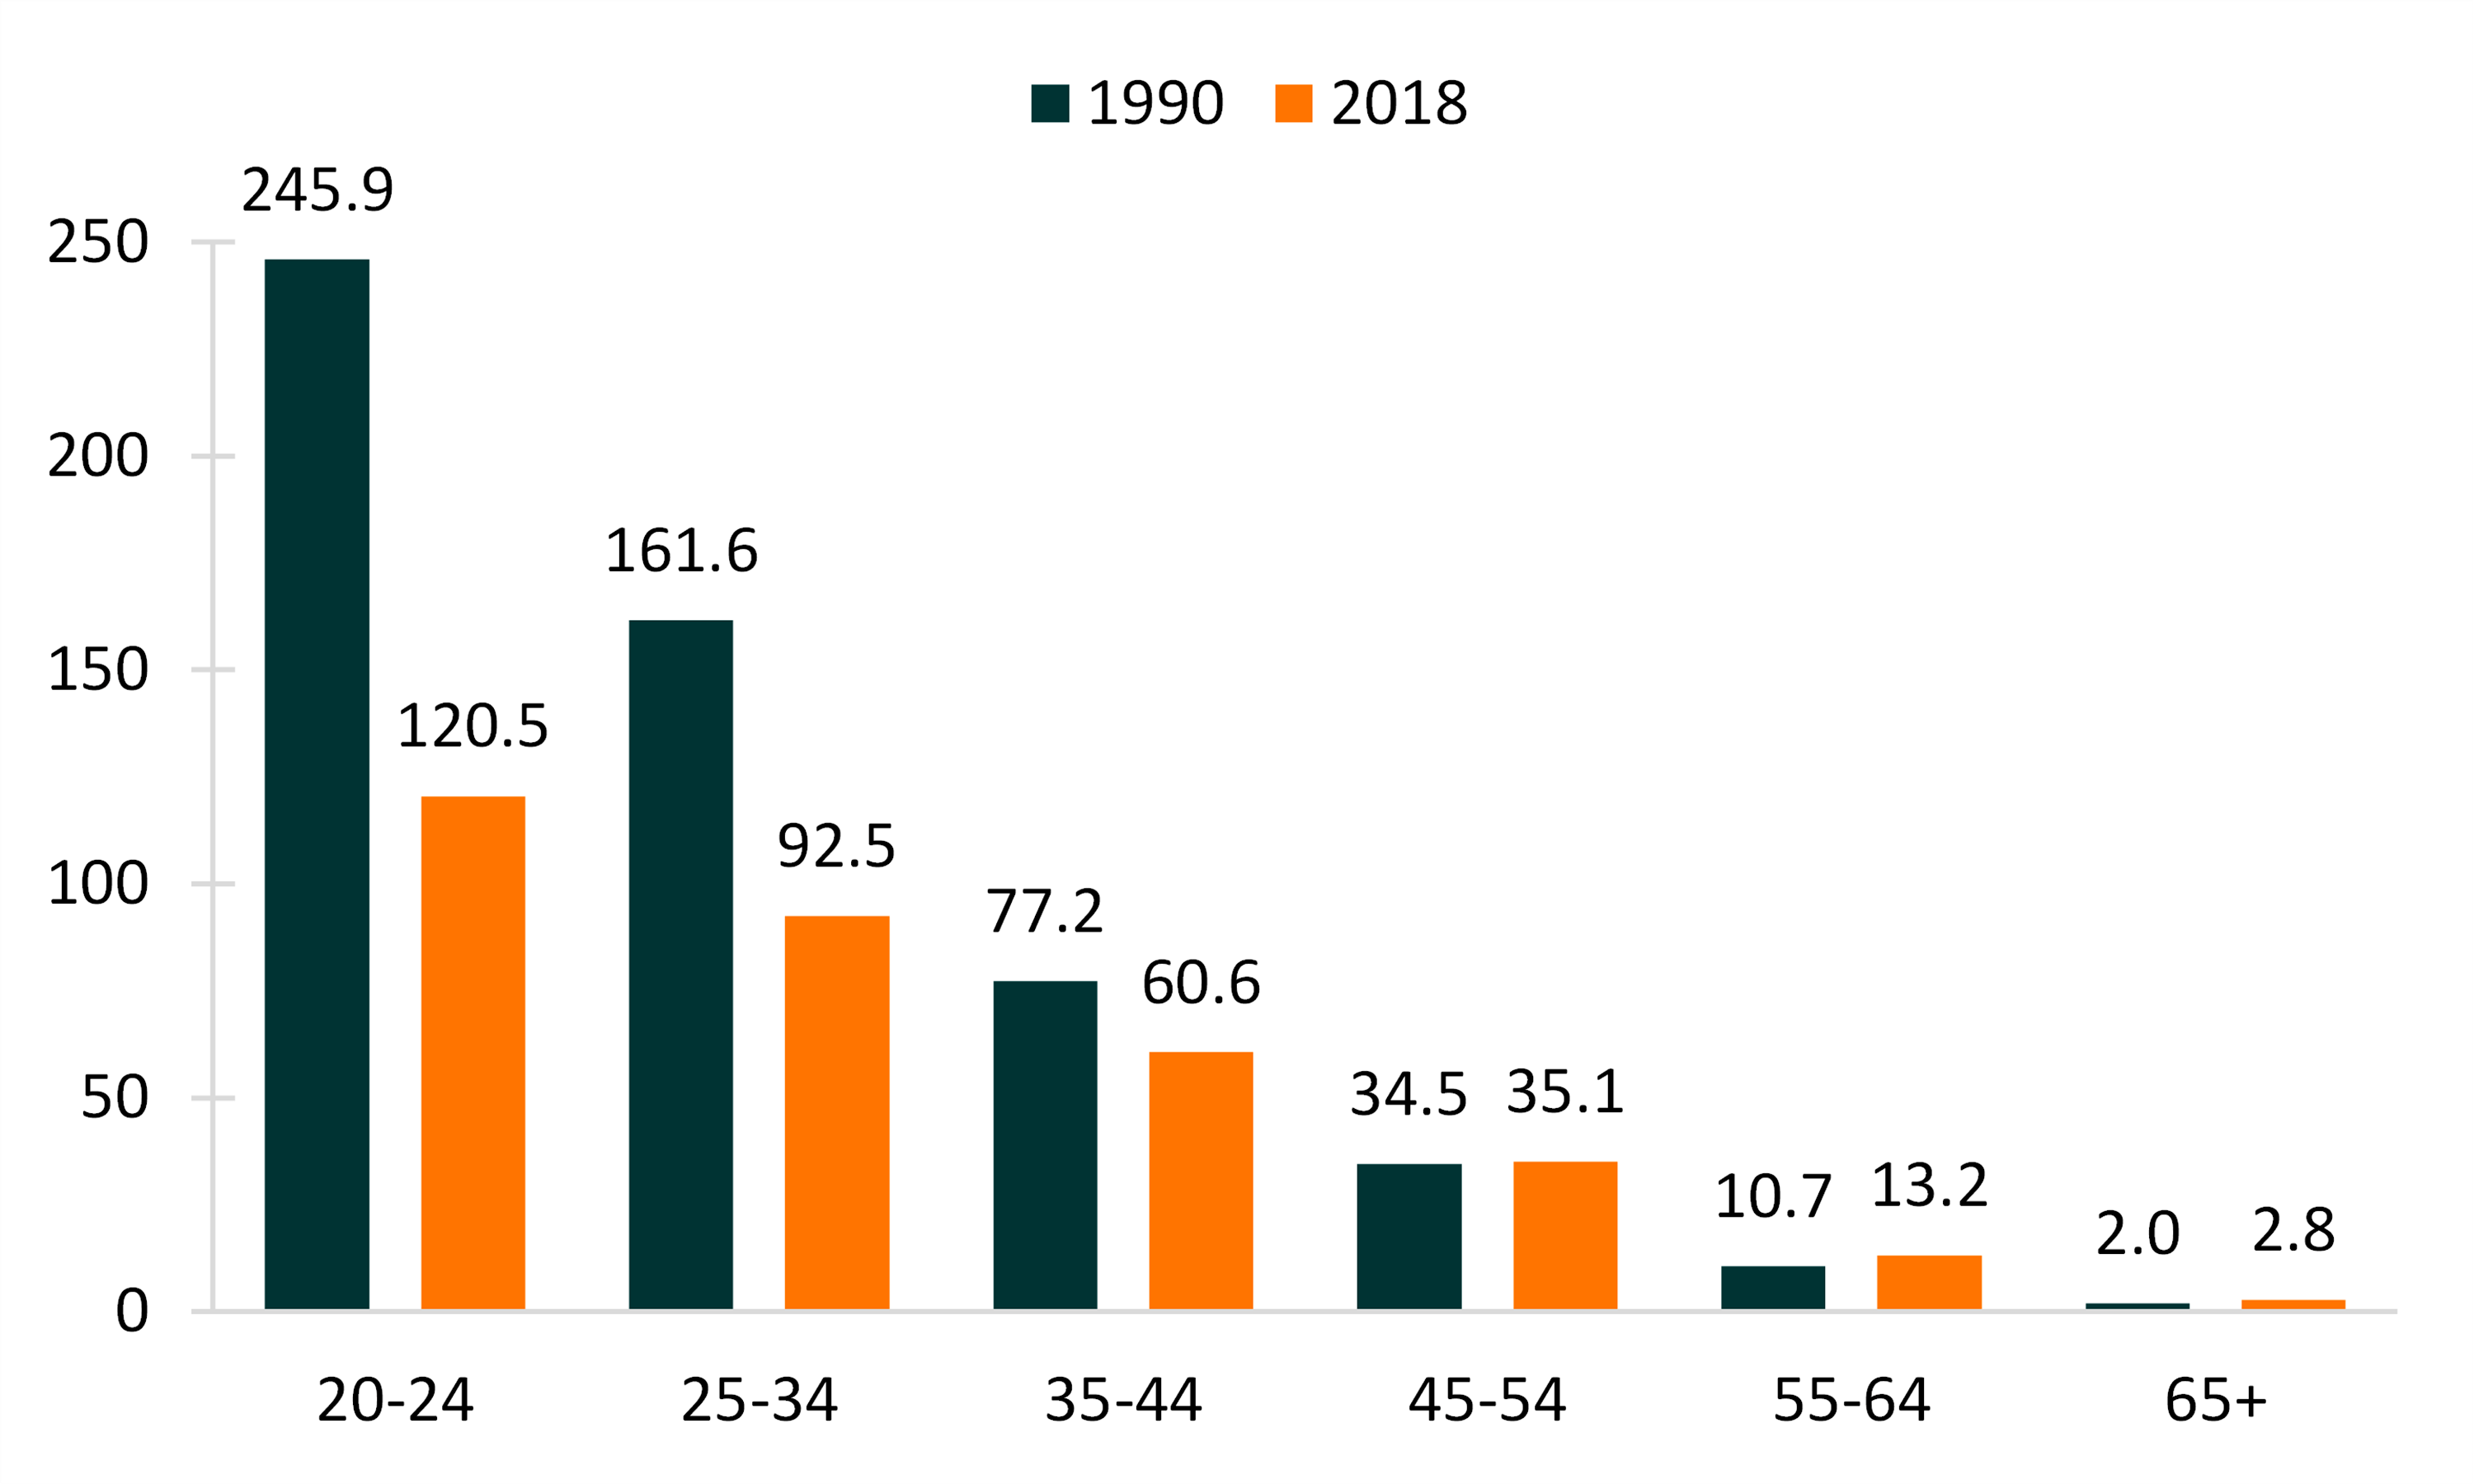 teal and orange bar chart showing women's remarriage rates by age groups, 1990 & 2018